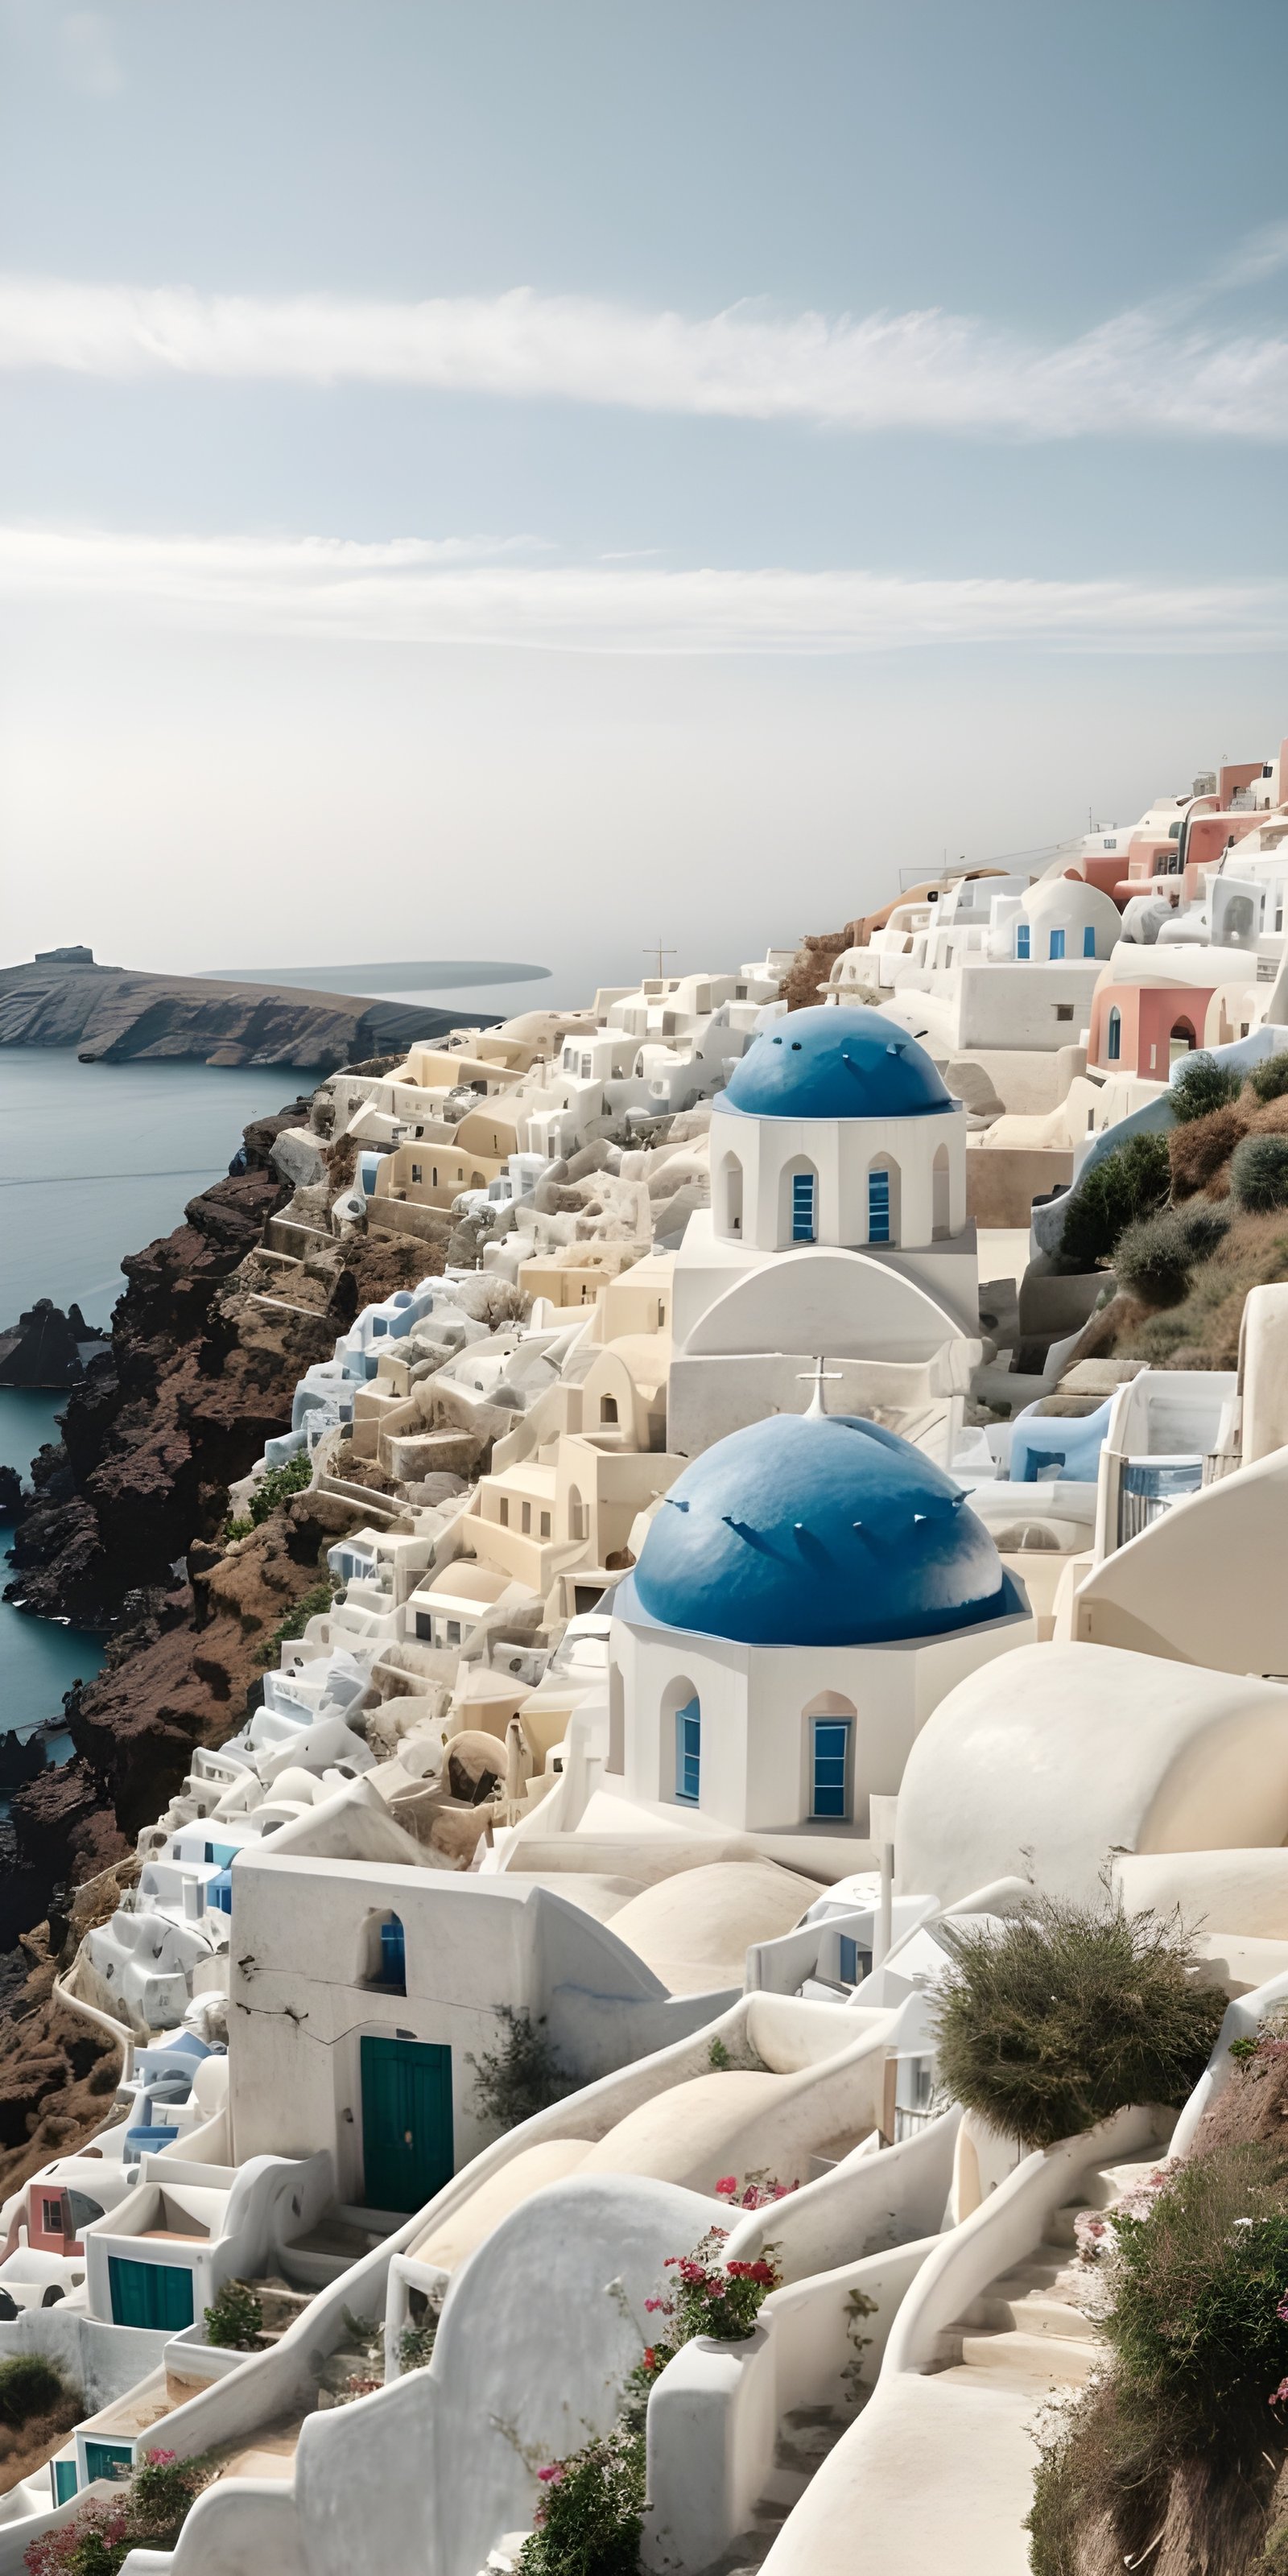 White-washed buildings and blue-domed churches of Santorini, Greece Download Now, World Places